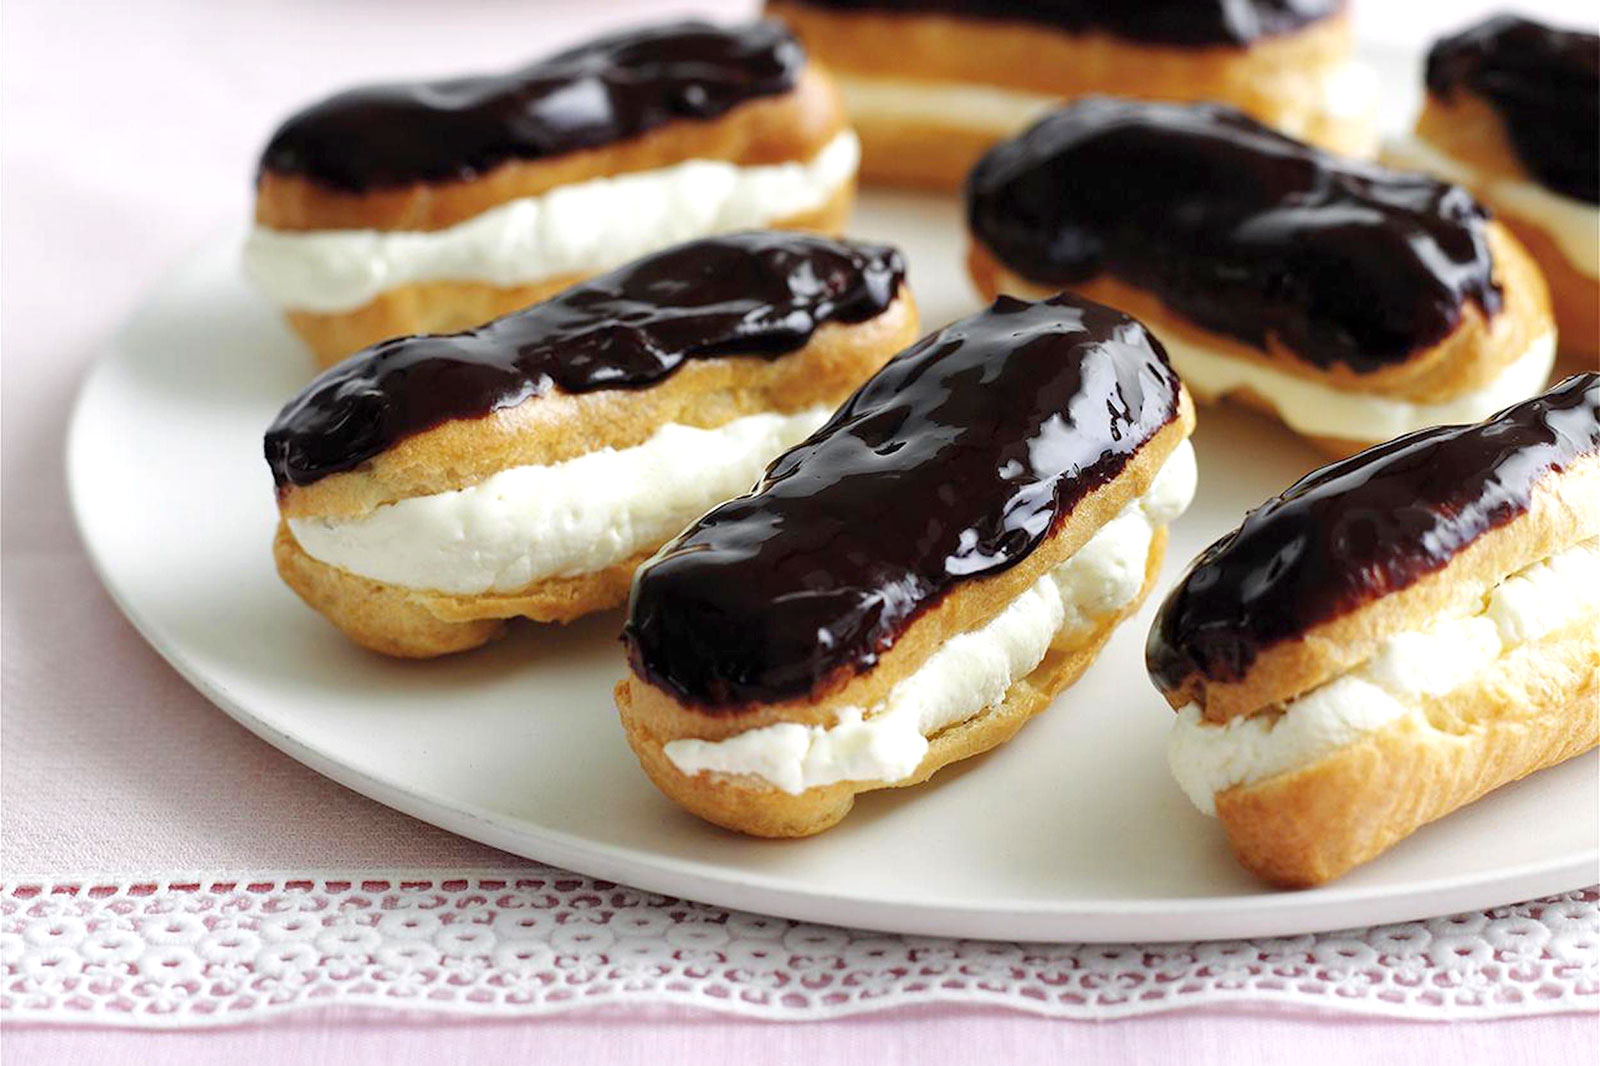 🍰 Only a Baked Good Connoisseur Will Have Eaten at Least 20/39 of These Foods Éclairs